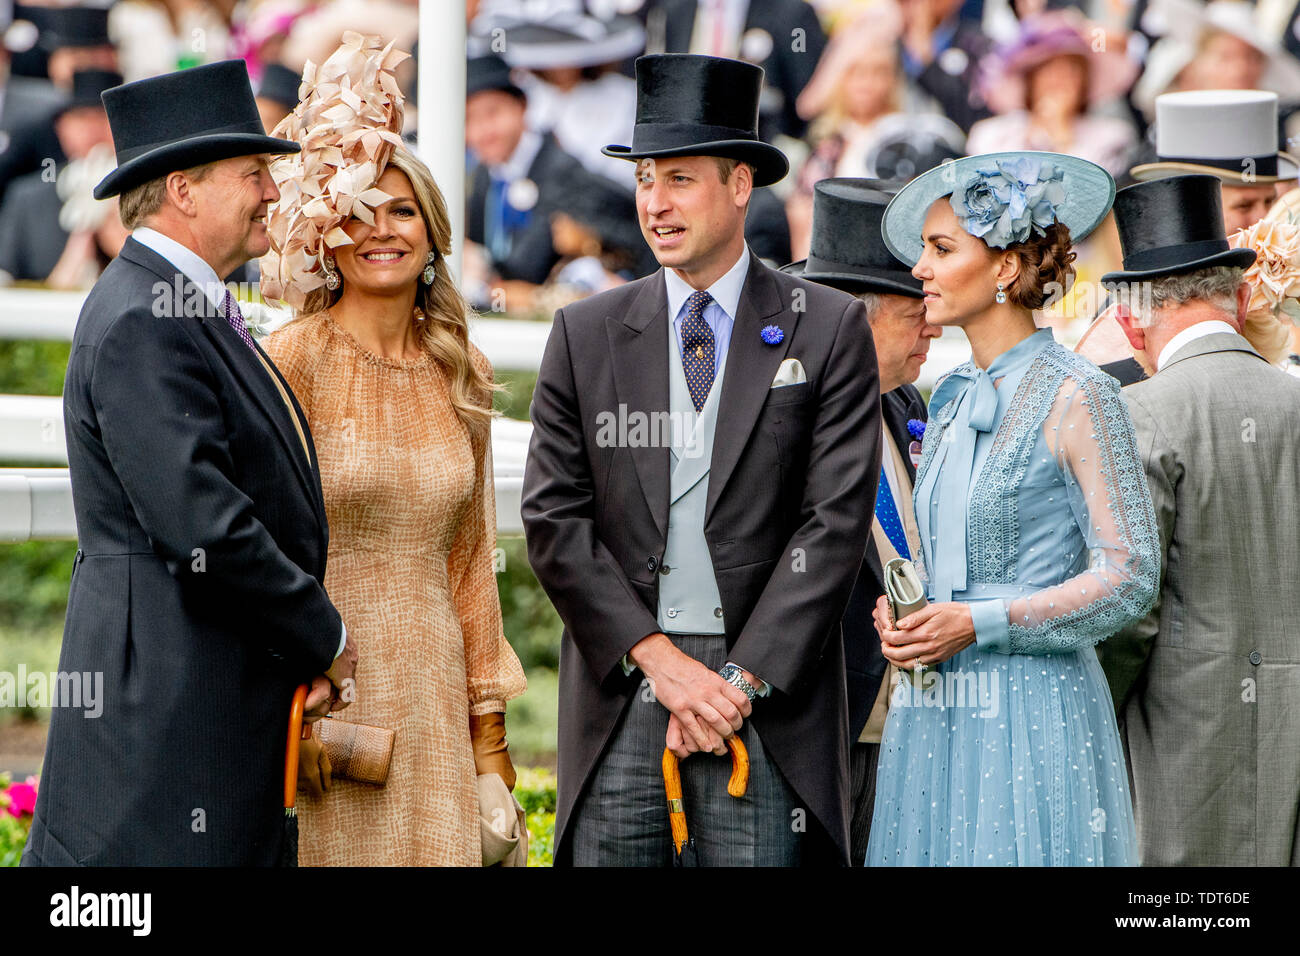 Ascot, UK. 18th June, 2019. King Willem-Alexander and Queen Maxima visit Royal Ascot with Queen Elizabeth, Prince Charles, Camilla Duchess of Cornwall, William and Catherine Duke and Duchess of Cambridge in Ascot, United Kingdom, 18 June 2019. |/Alamy Live News Stock Photo